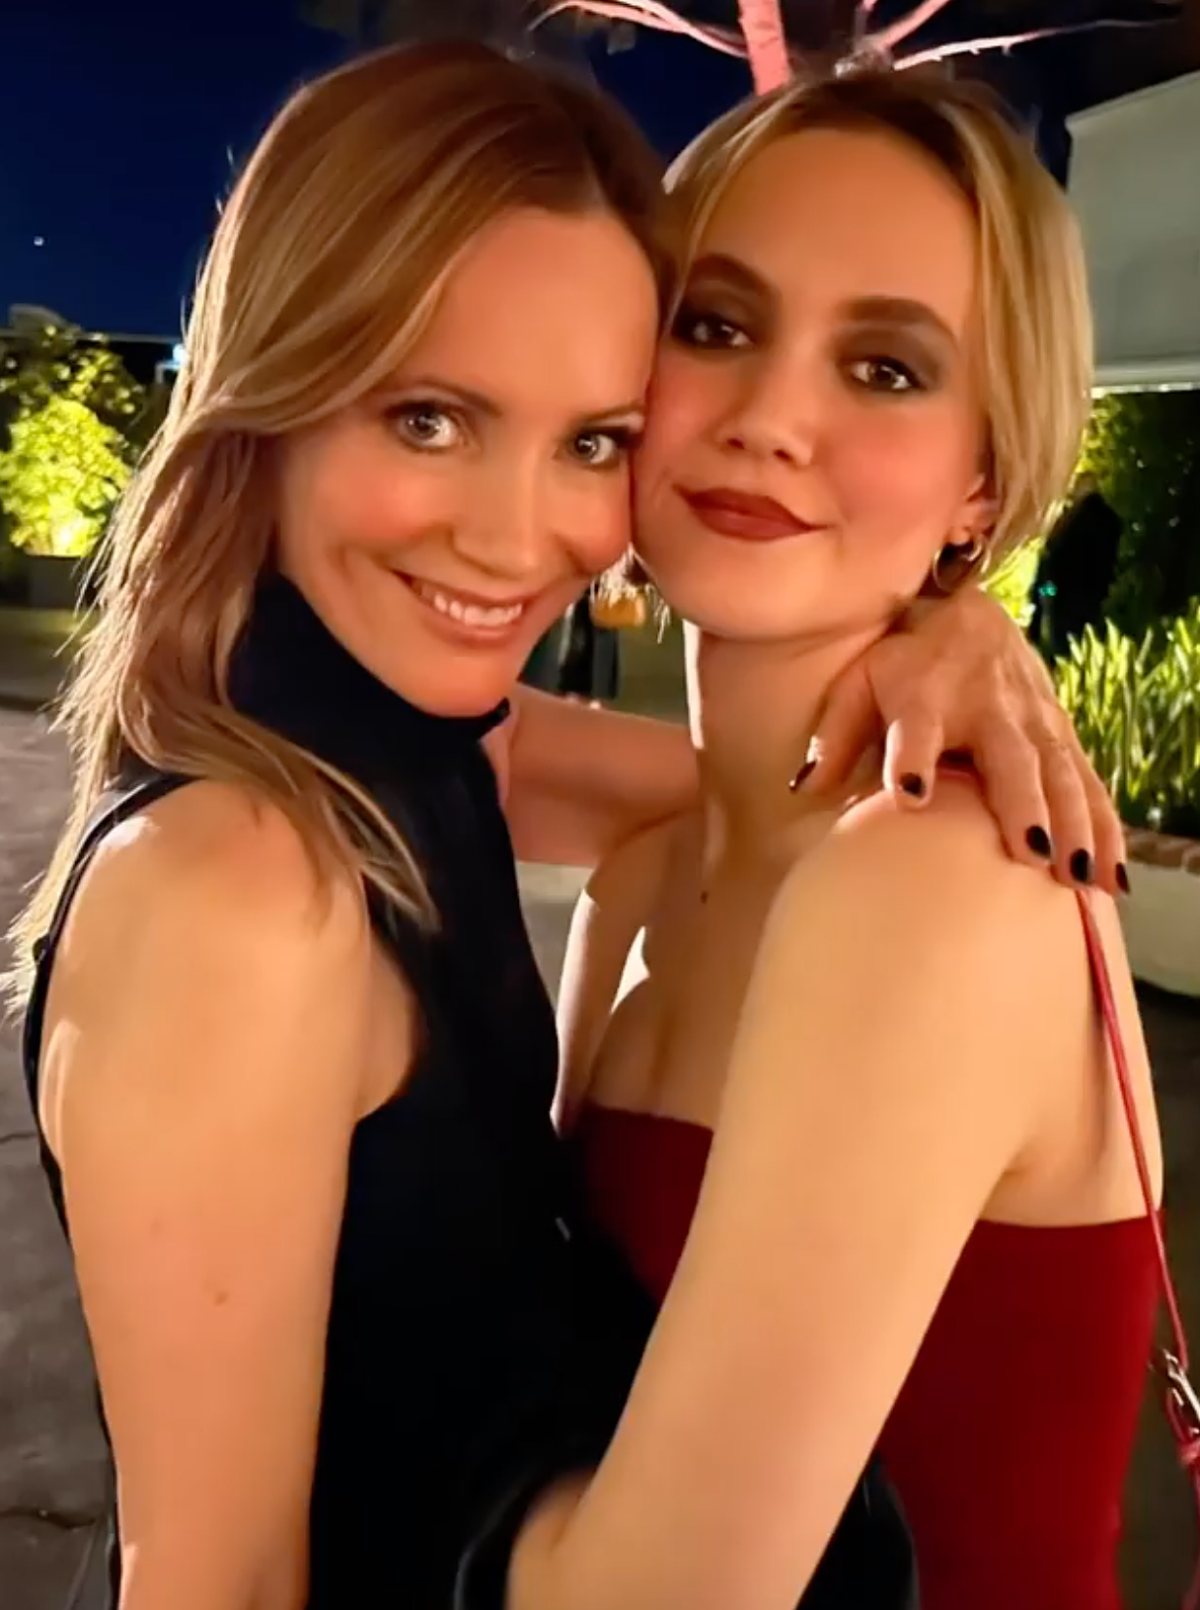 Leslie Mann Before She Married Judd Apatow (PHOTO)